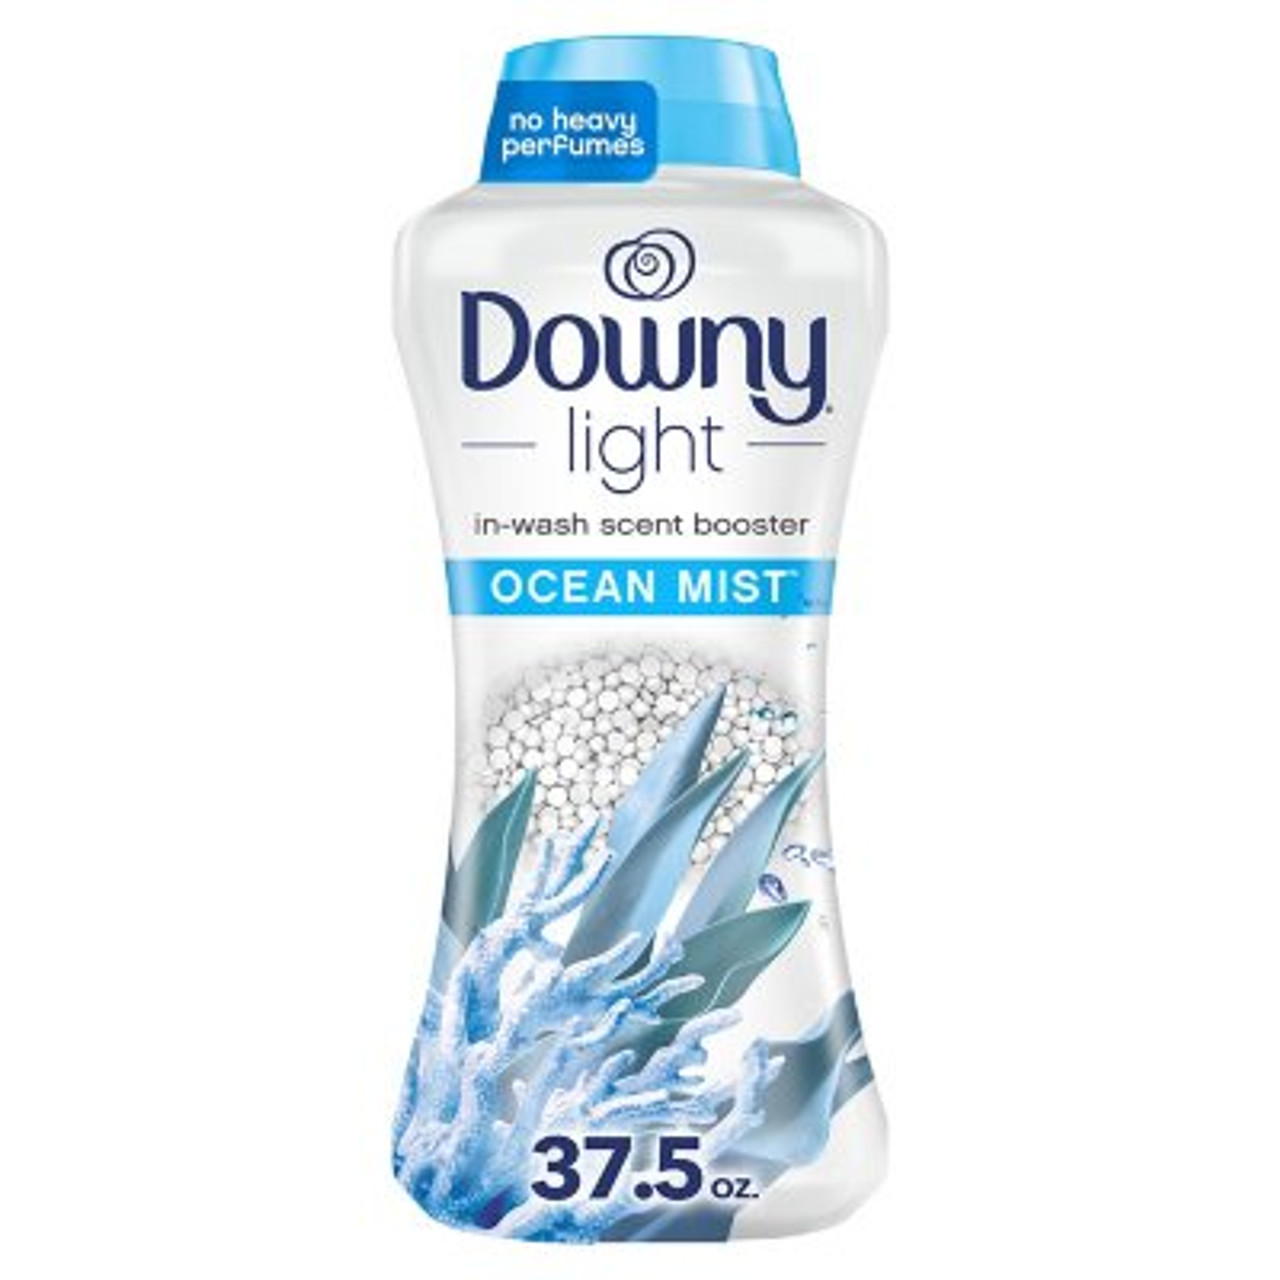 Downy Light In-Wash Scent Booster Beads, Ocean Mist (37.5 oz.) - [From 70.00 - Choose pk Qty ] - *Ships from Miami